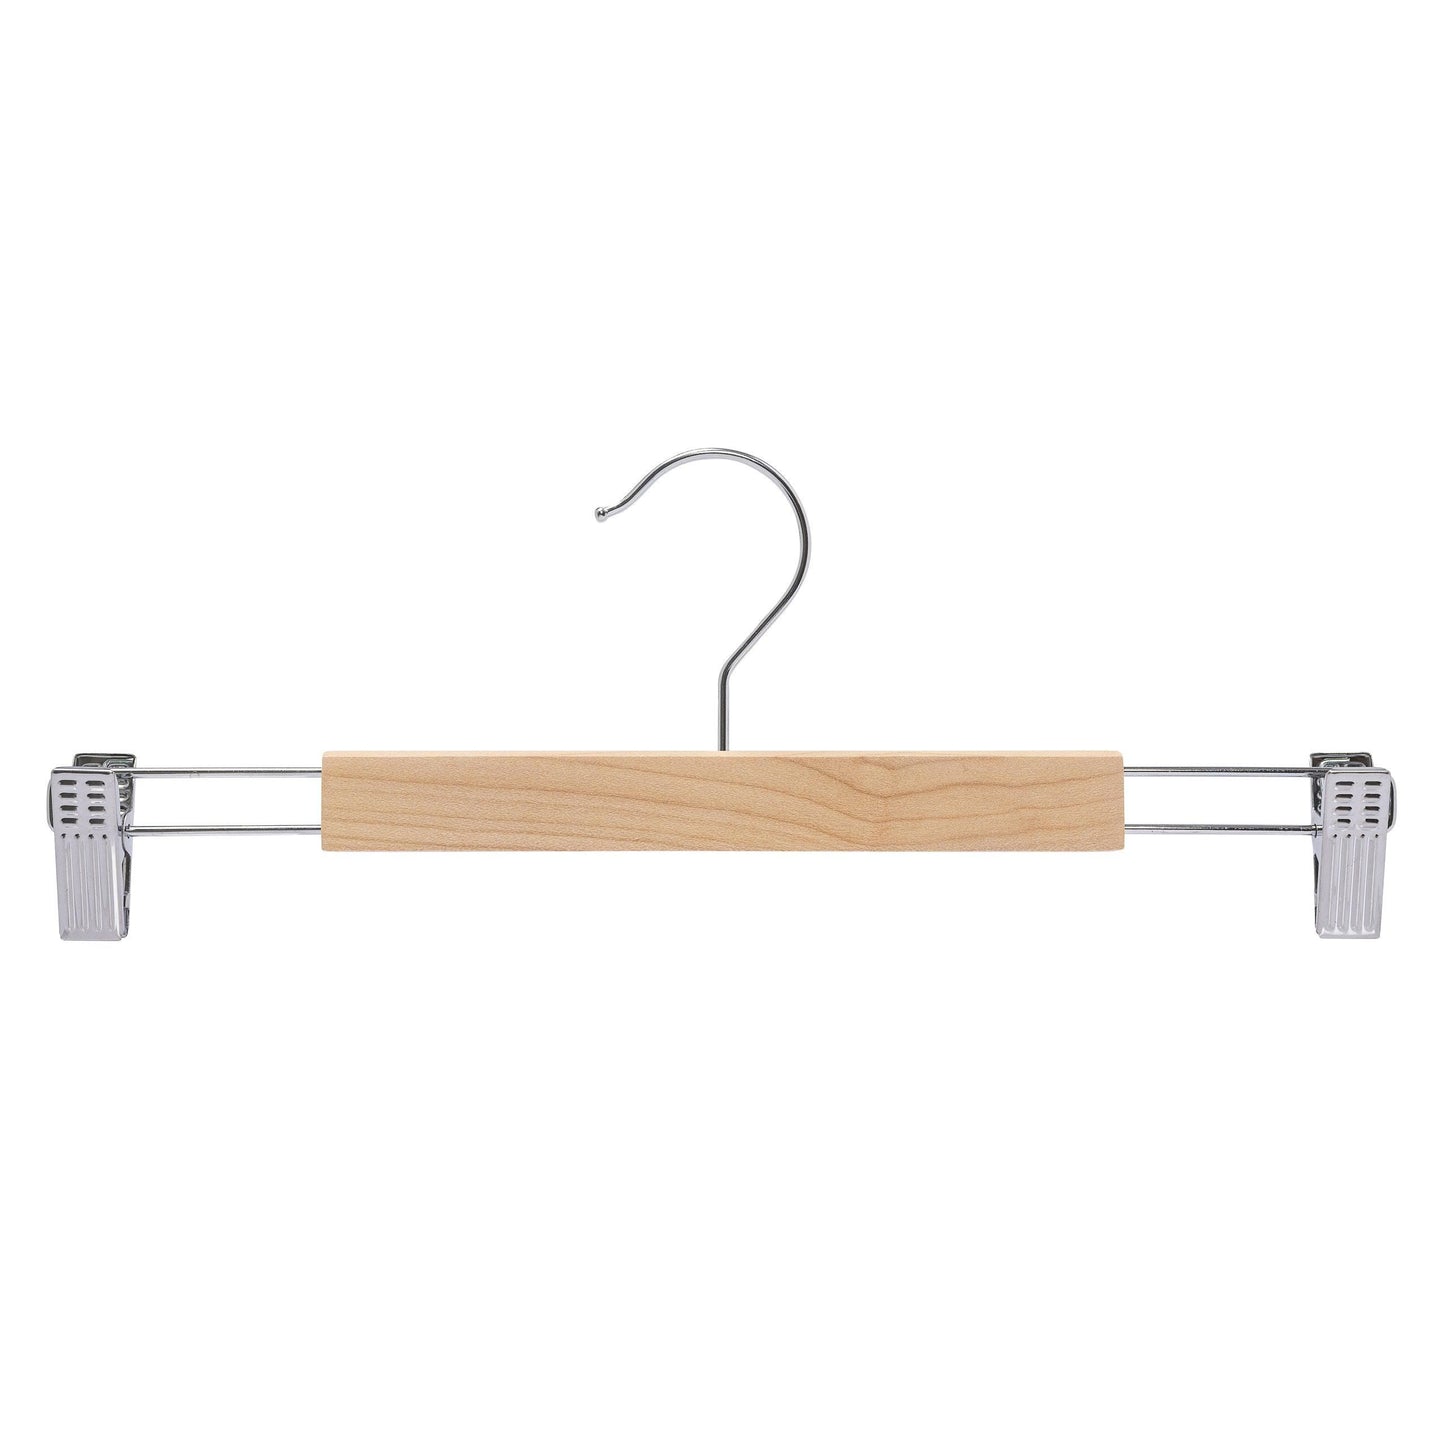 Premium Raw Wood Pant Hanger with NO Varnish With Clips - Fine Polished Surface - 35cm X 12mm Thick Sold in Bundle of 20/50/100 - Hangersforless